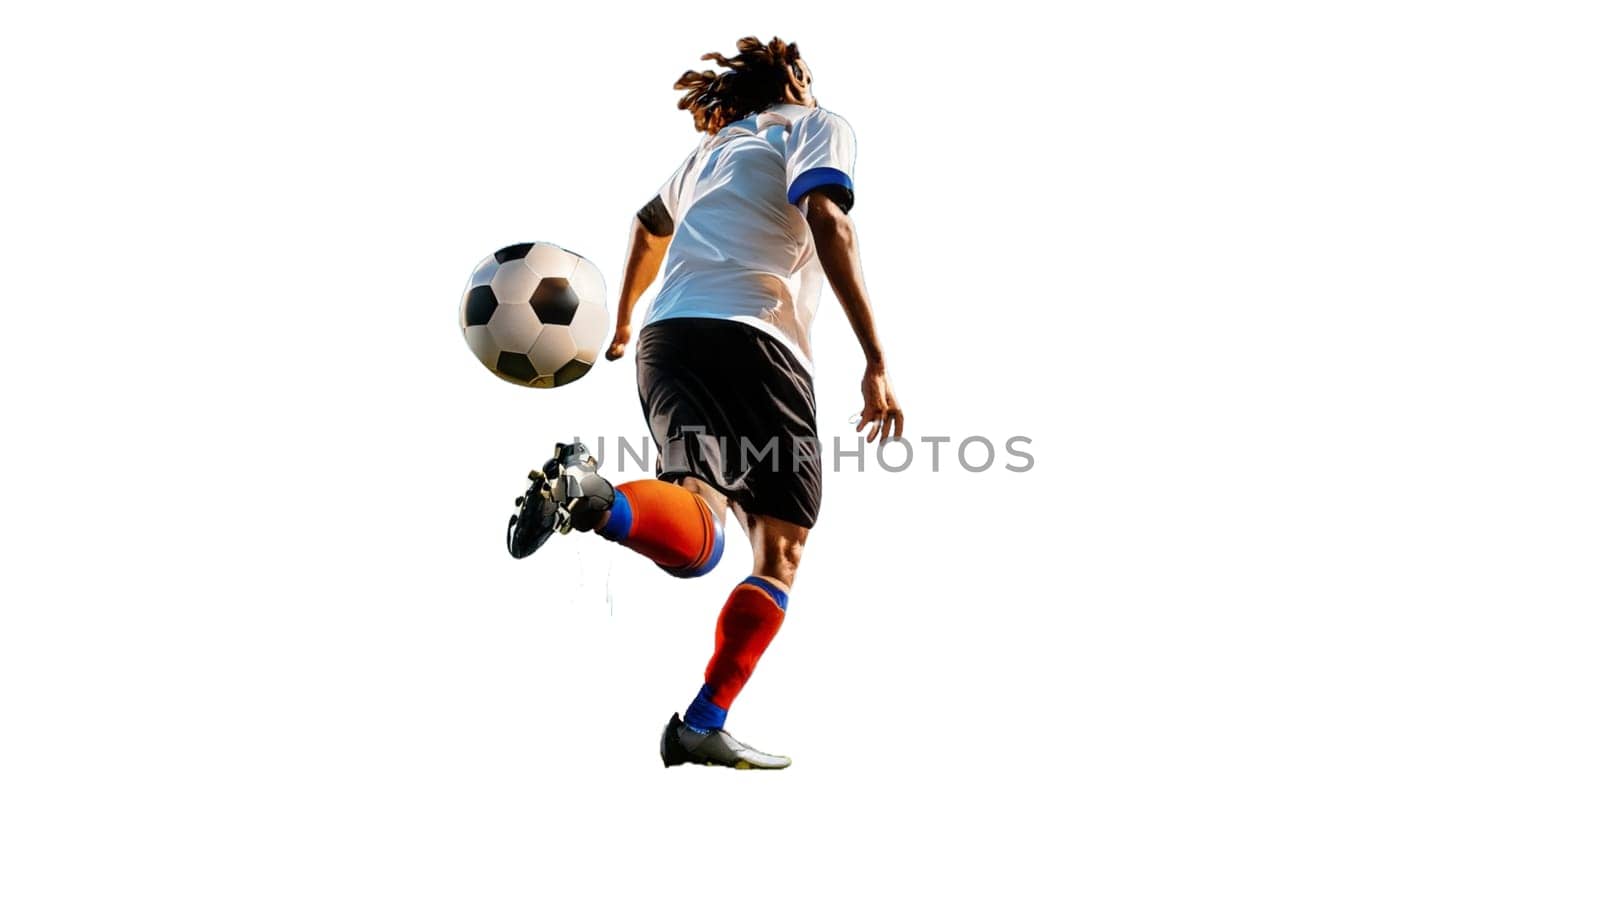 Young boy with soccer ball doing flying kick, isolated on white. football soccer players in motion on studio background. Fit jumping boy in action, jump, movement at game. High quality photo